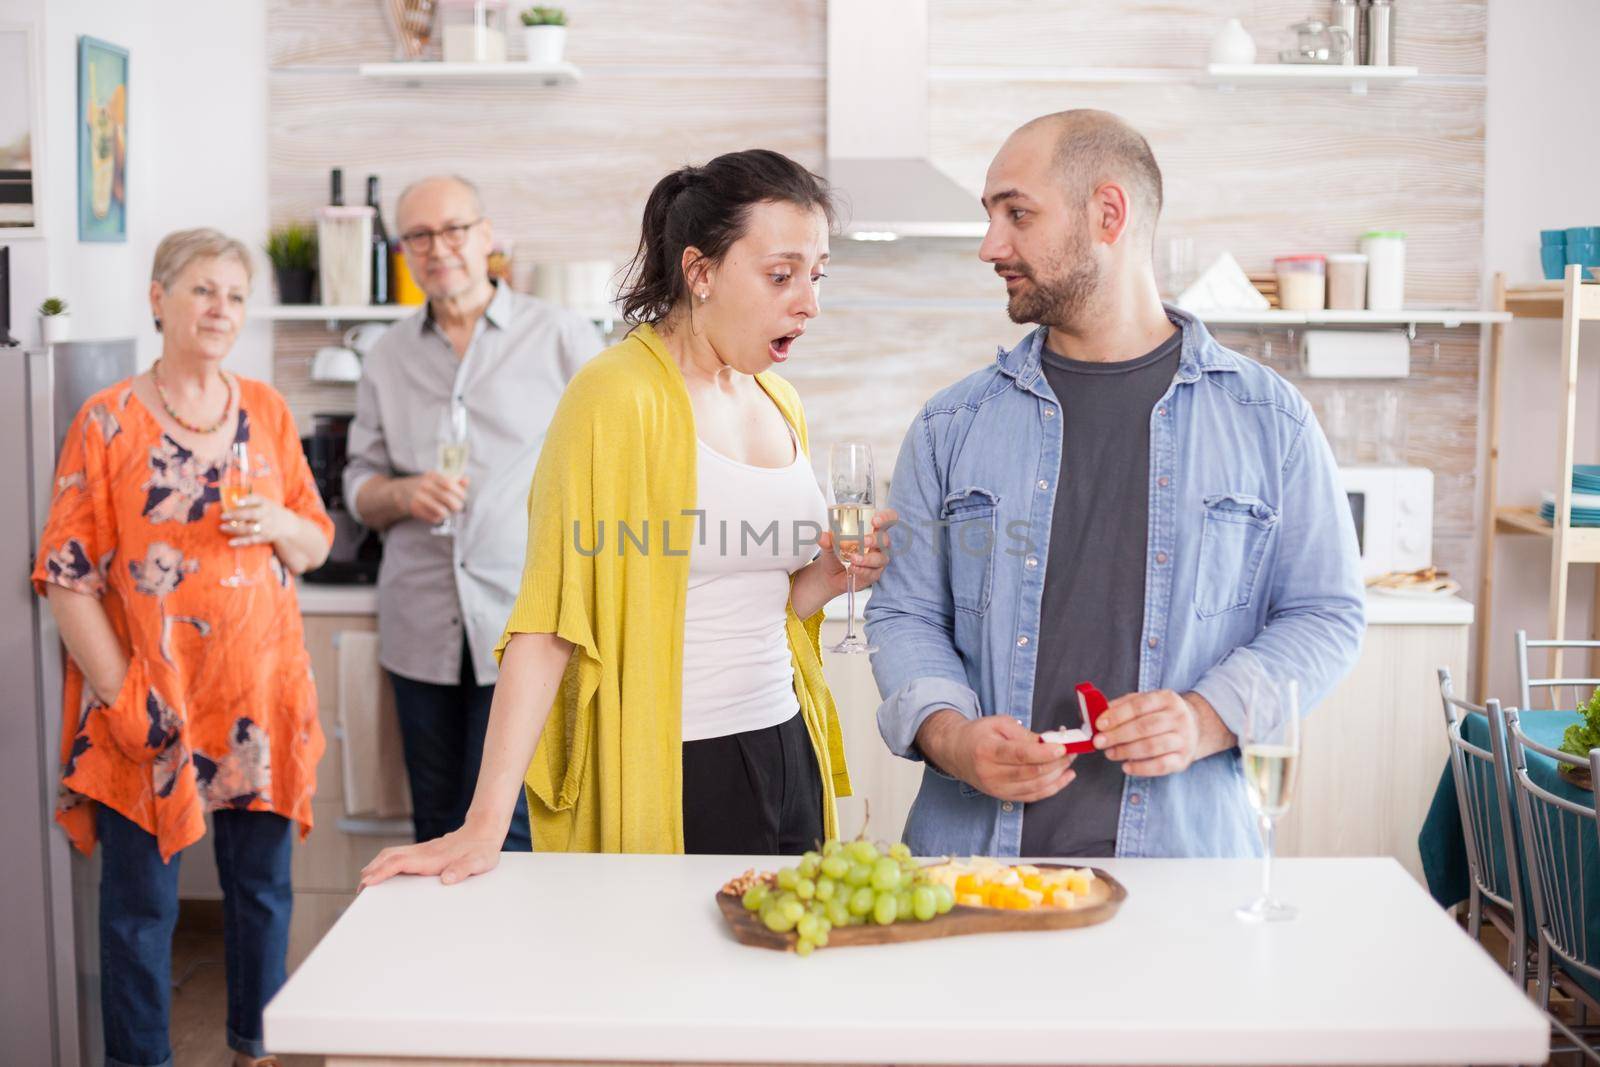 Man proposing wife during family lunch. Shocked young woman looking at engagement ring while holding a glass of wine